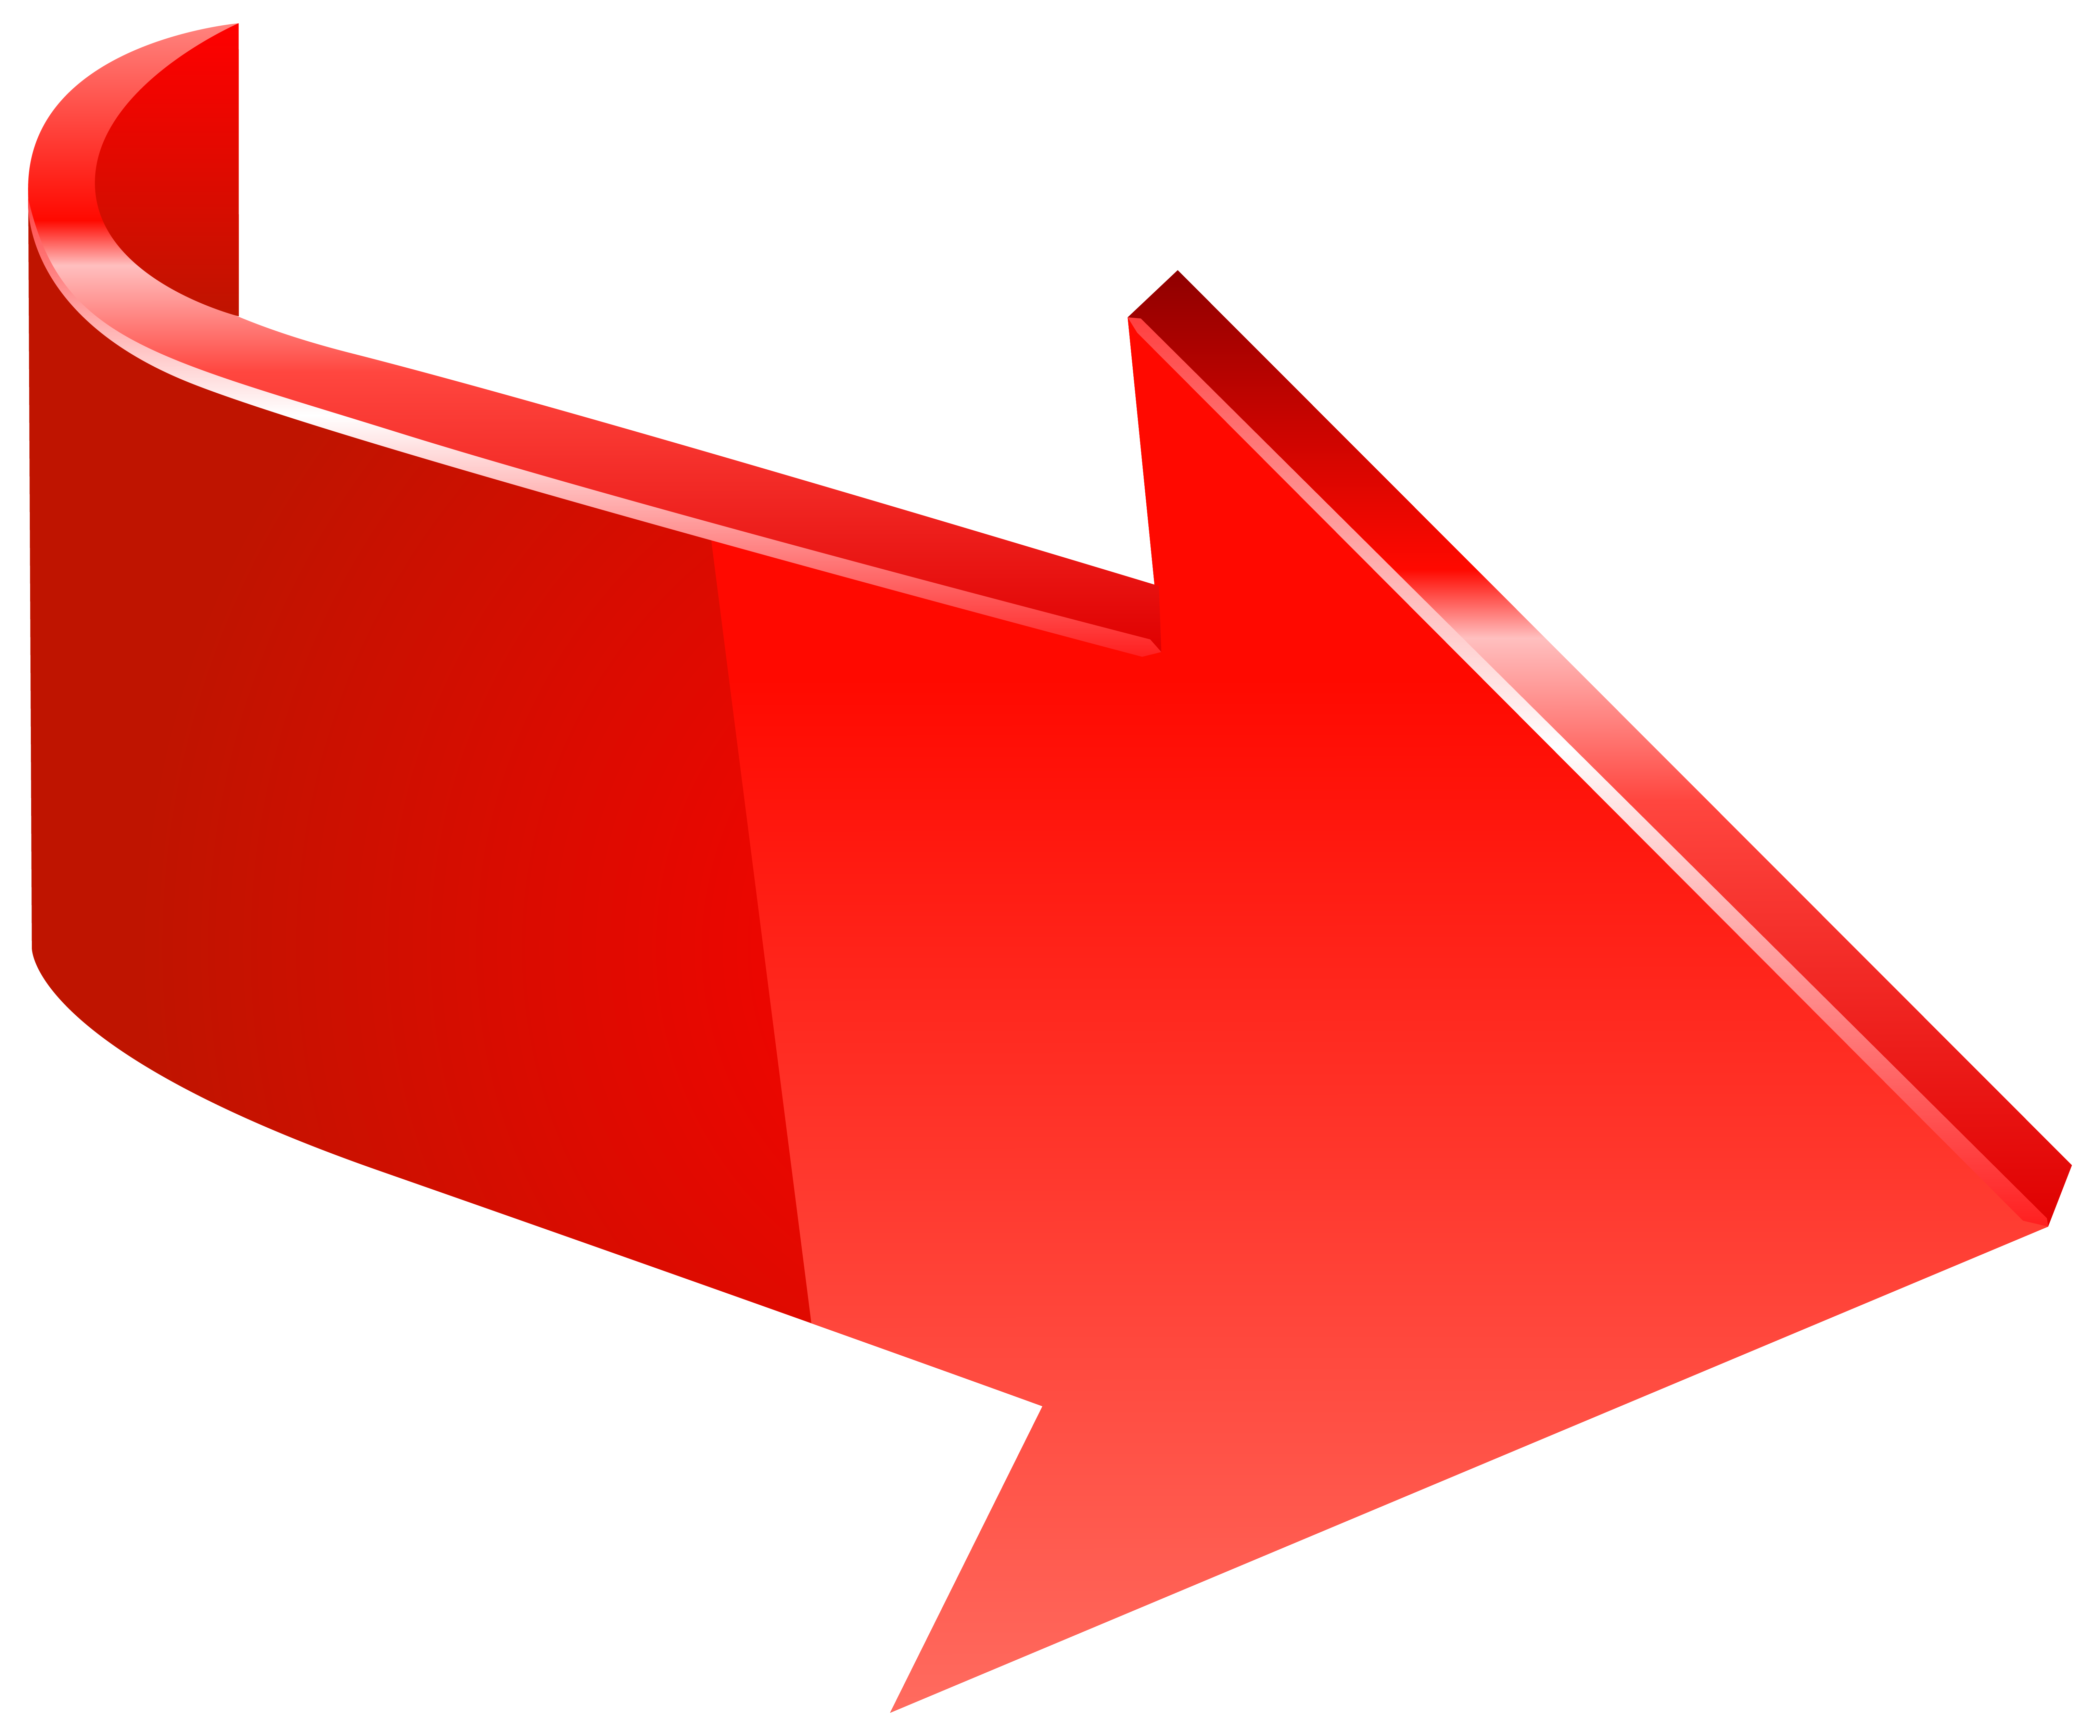 Red Arrow Right Transparent PNG Clip Art Image | Gallery Yopriceville - High-Quality ...6135 x 5071